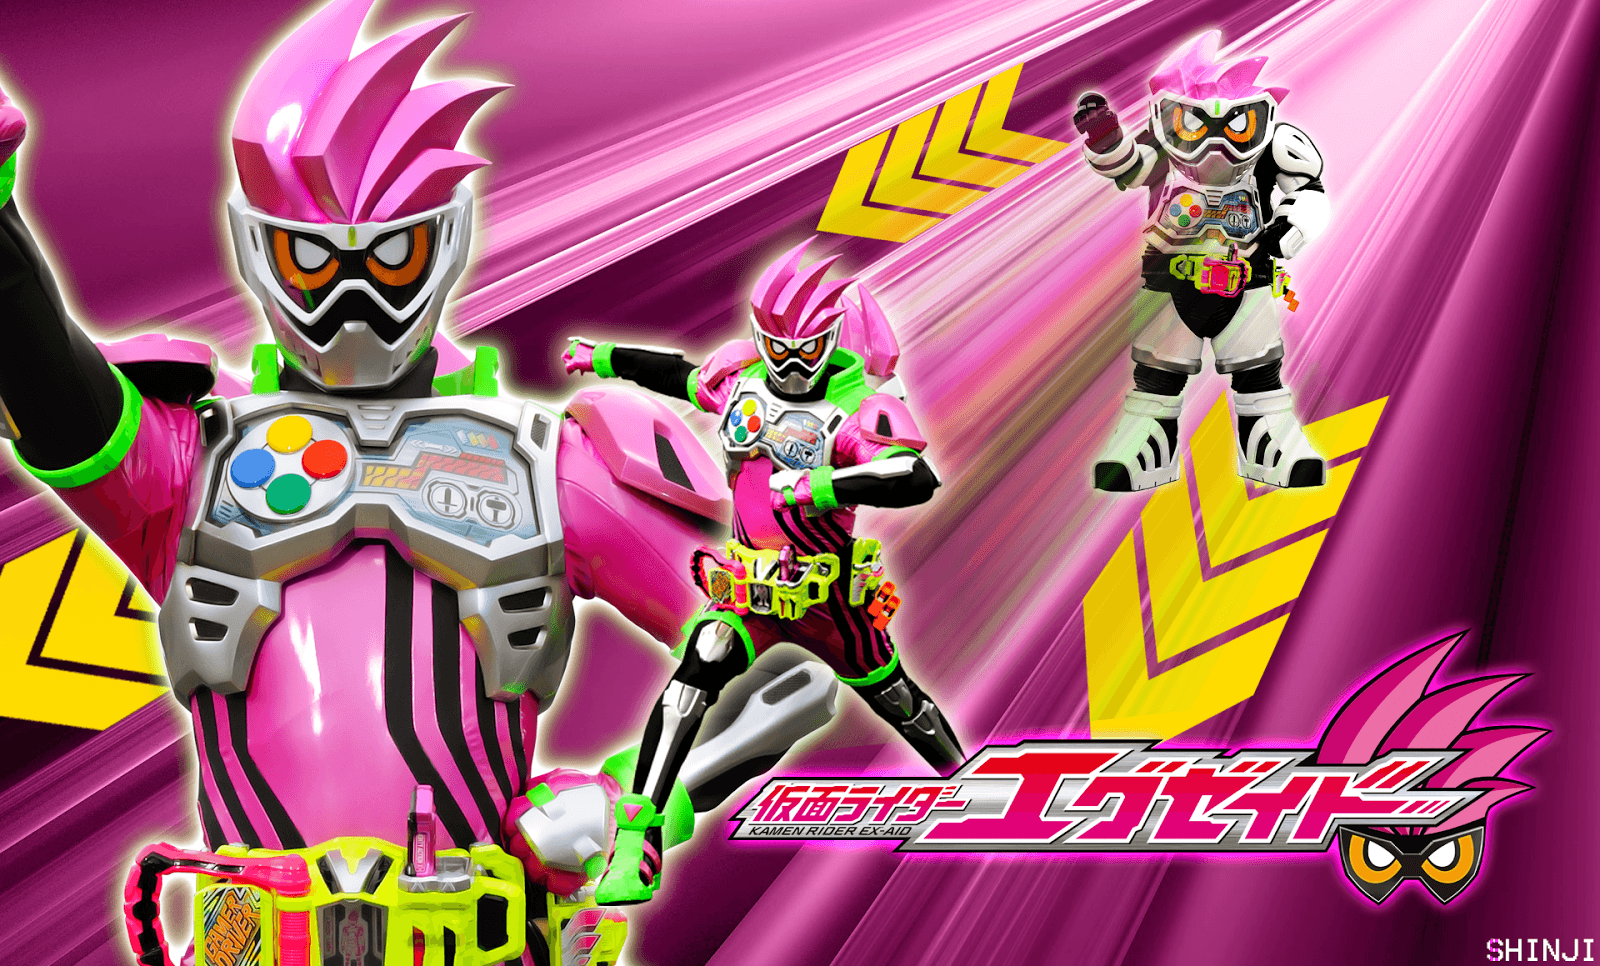 Tokufanatic: Kamen rider ex aid(completed)